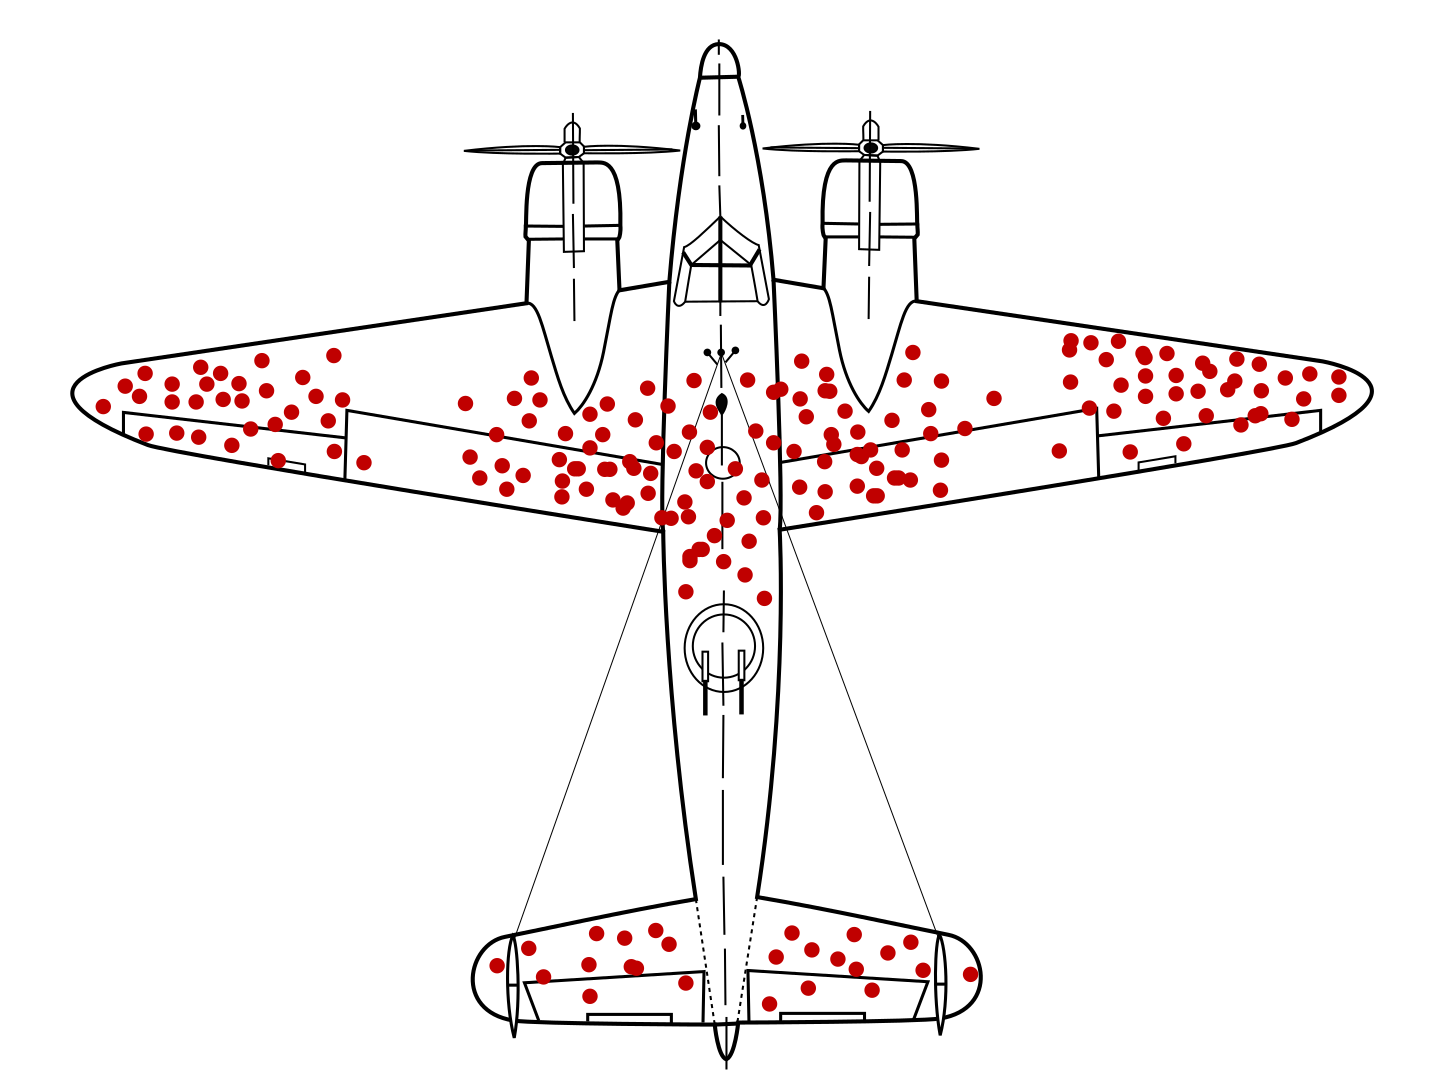 A popular visual representation of survivorship bias. This demonstrative diagram shows where WW2-era planes were hit but could still return home. Hits are disproportionally present in areas not vital for returning home safely, therefore exhibiting survivorship bias.